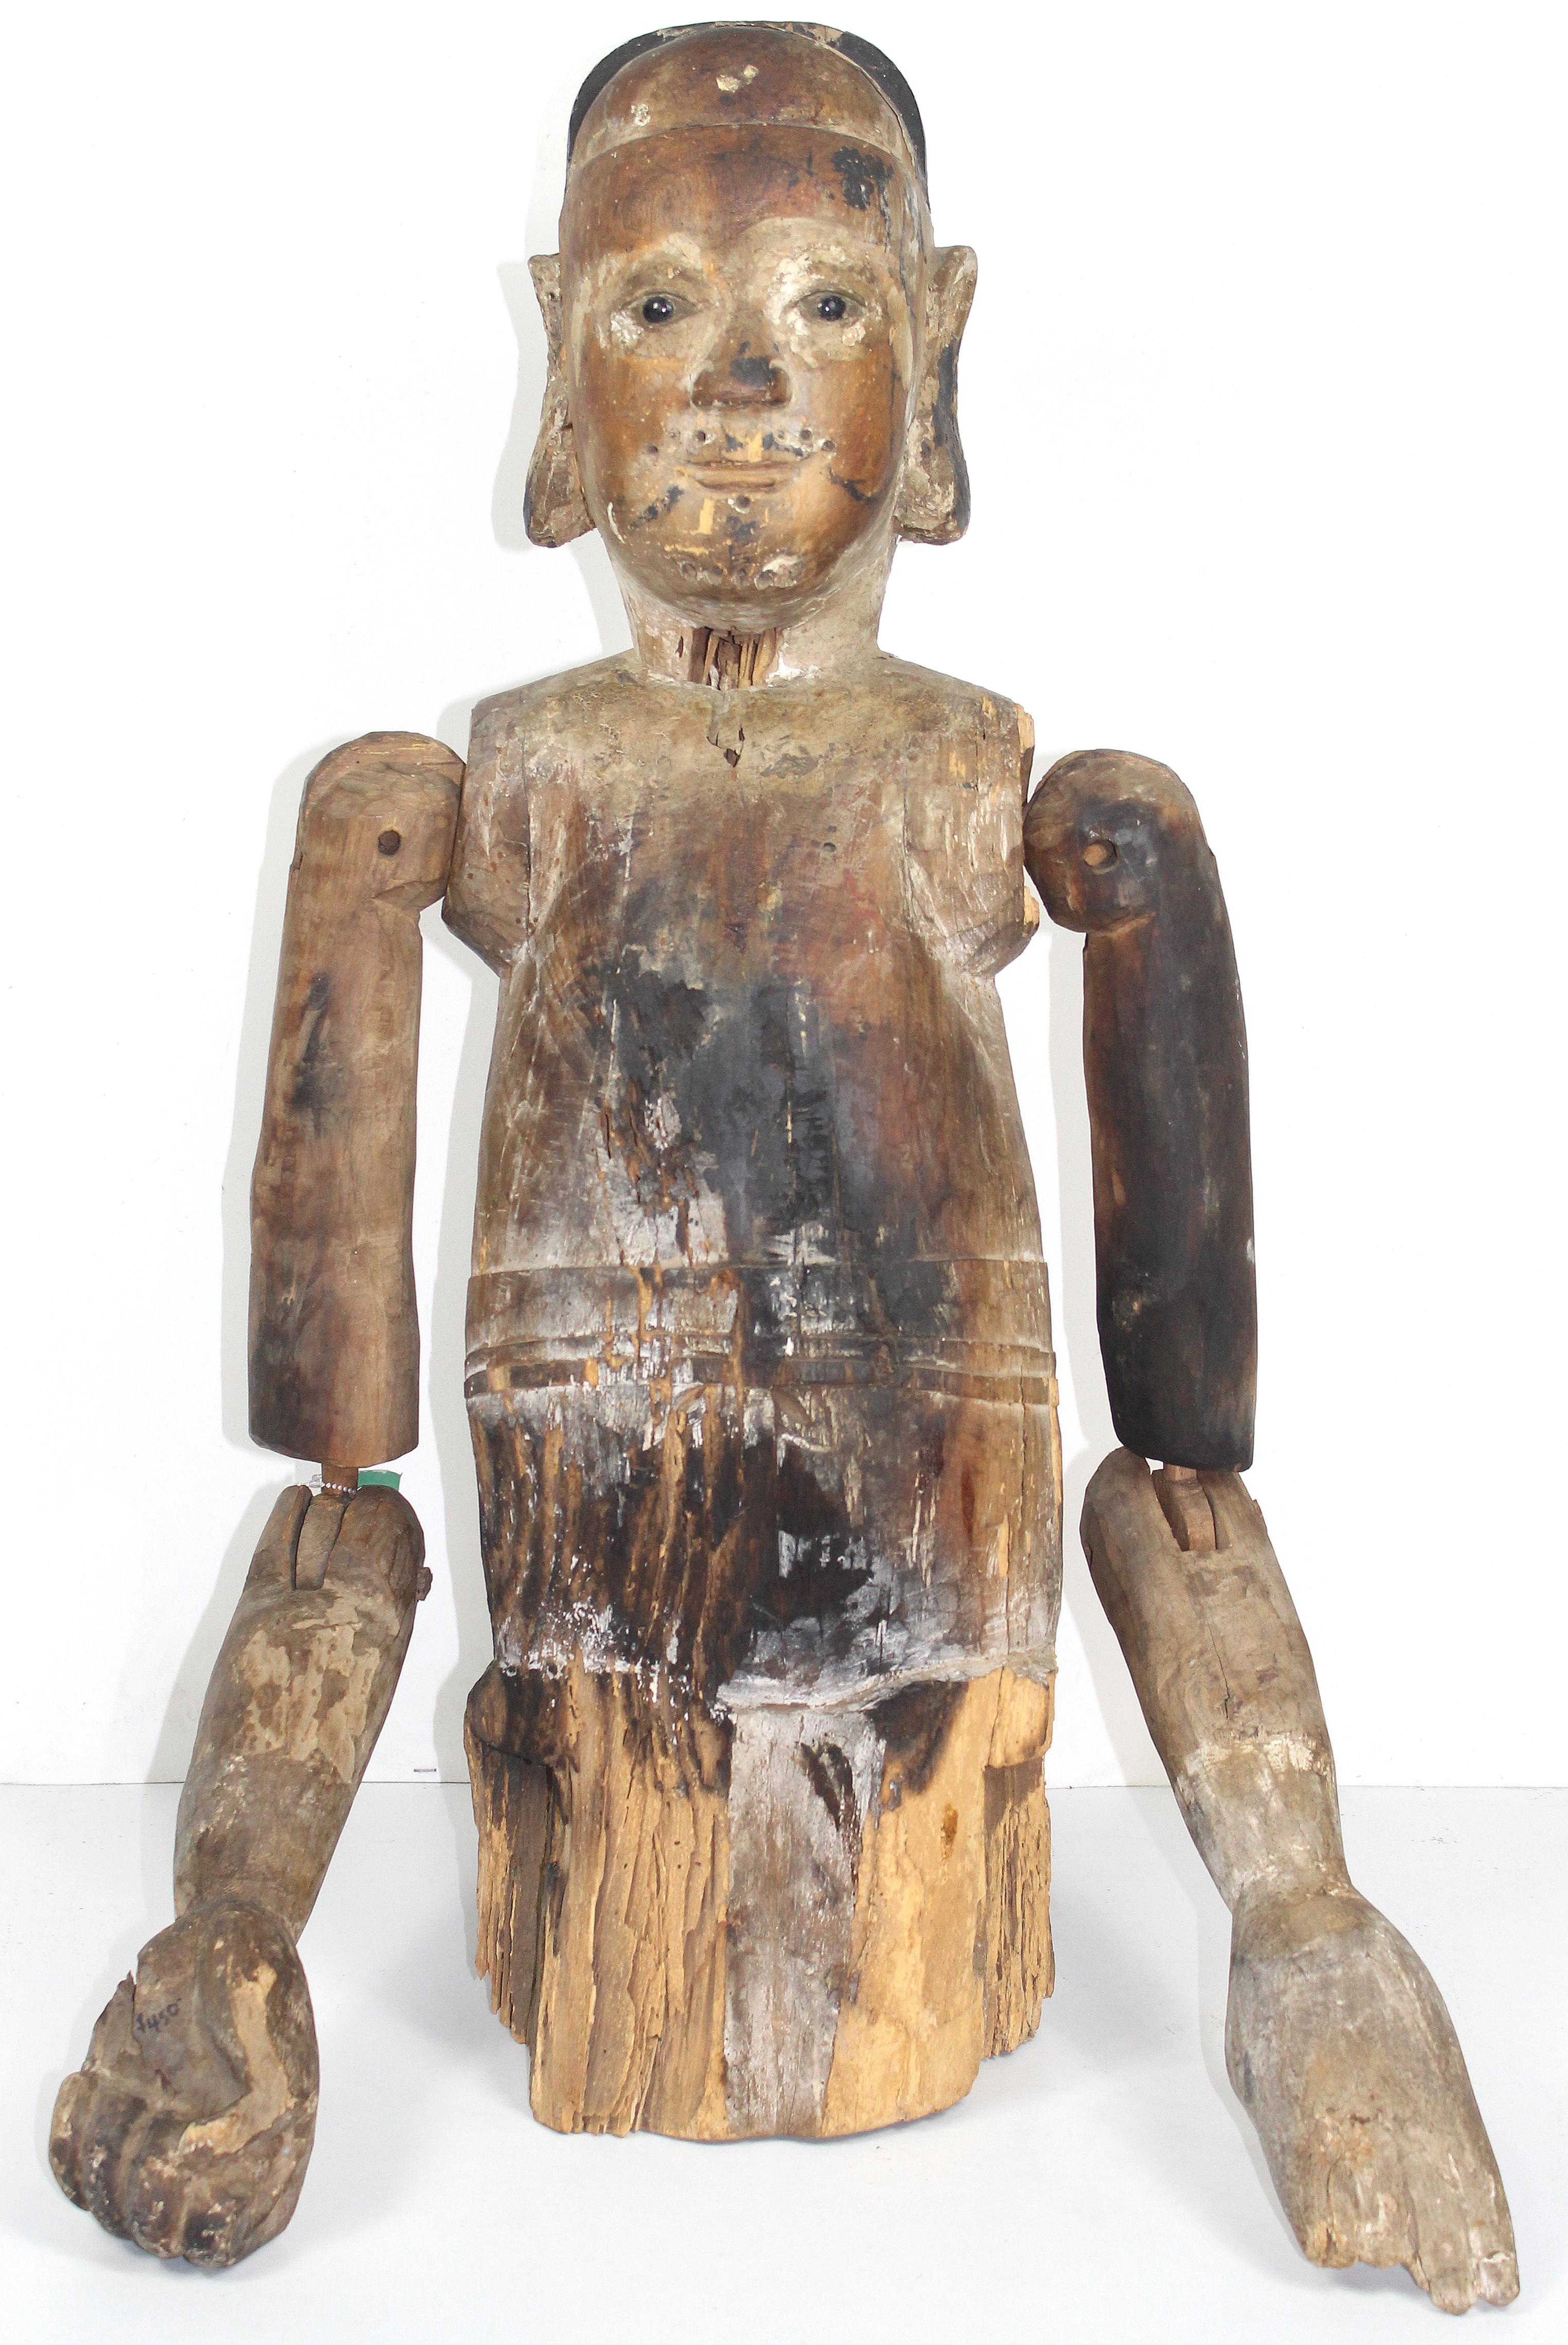 19th century antique carved wooden figure sculpture with articulated joints


This is a very rare 18th-19th century sculpted Folk Art wood figure with articulated joints. This rustic figure could be from the Pacific Rim, possibly from the